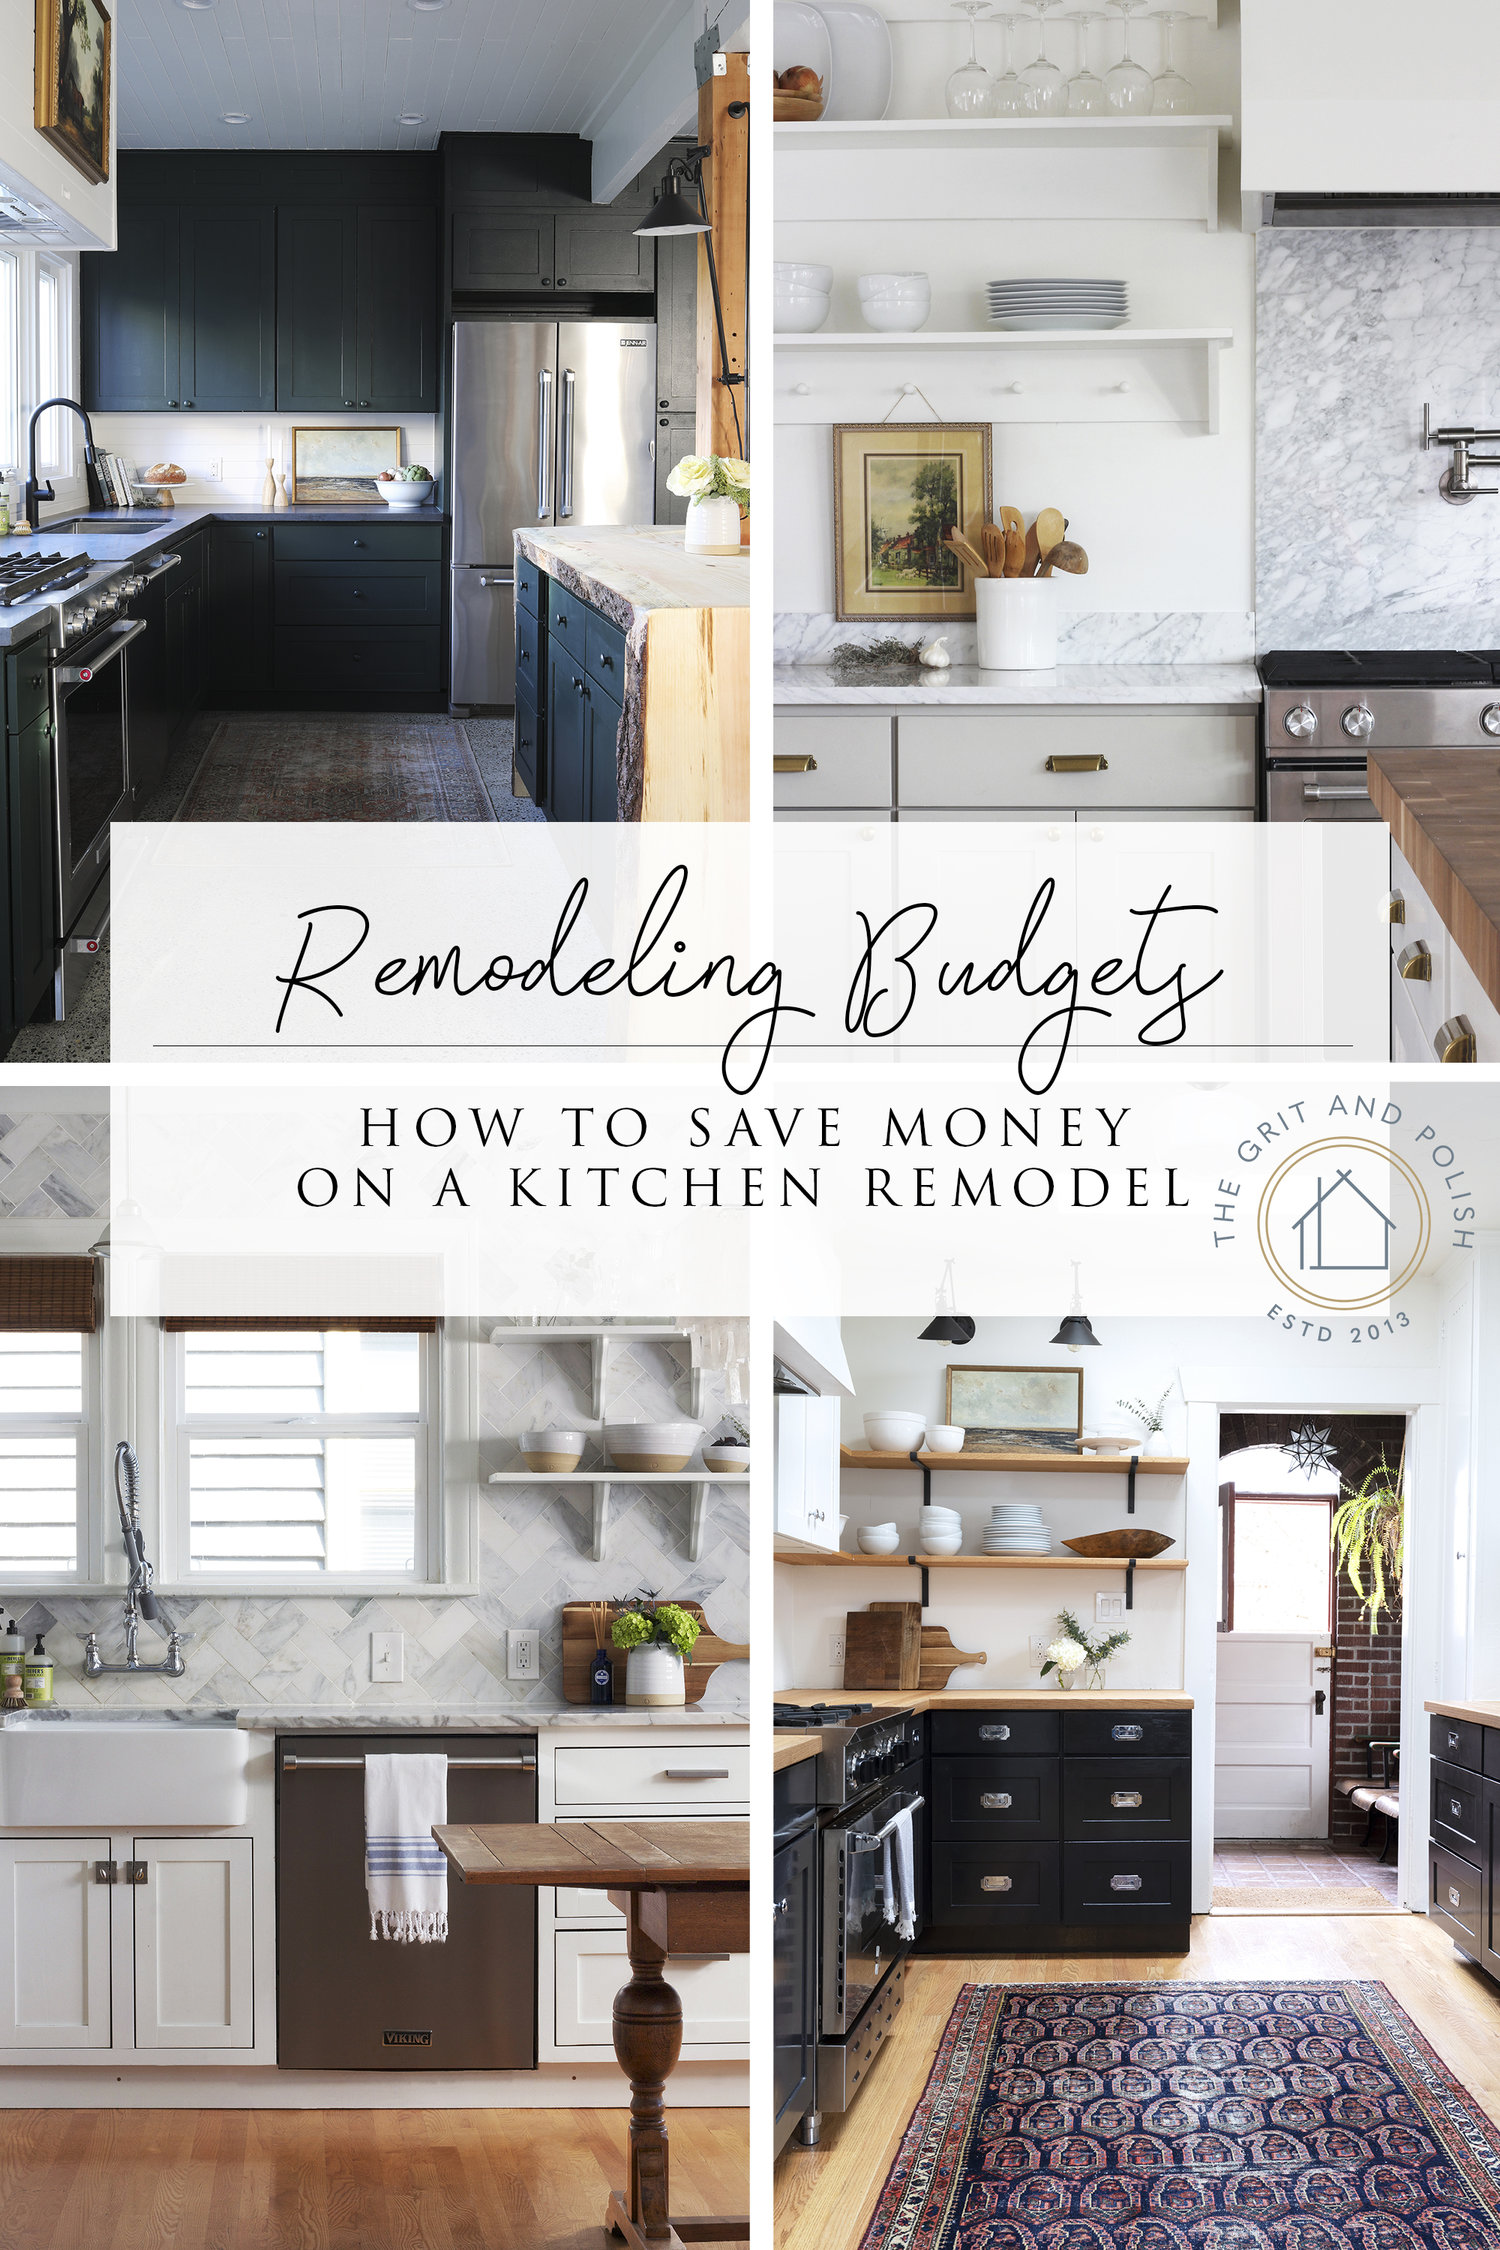 How to Save Money On A Kitchen Remodel (+ Win $9,9 Towards your